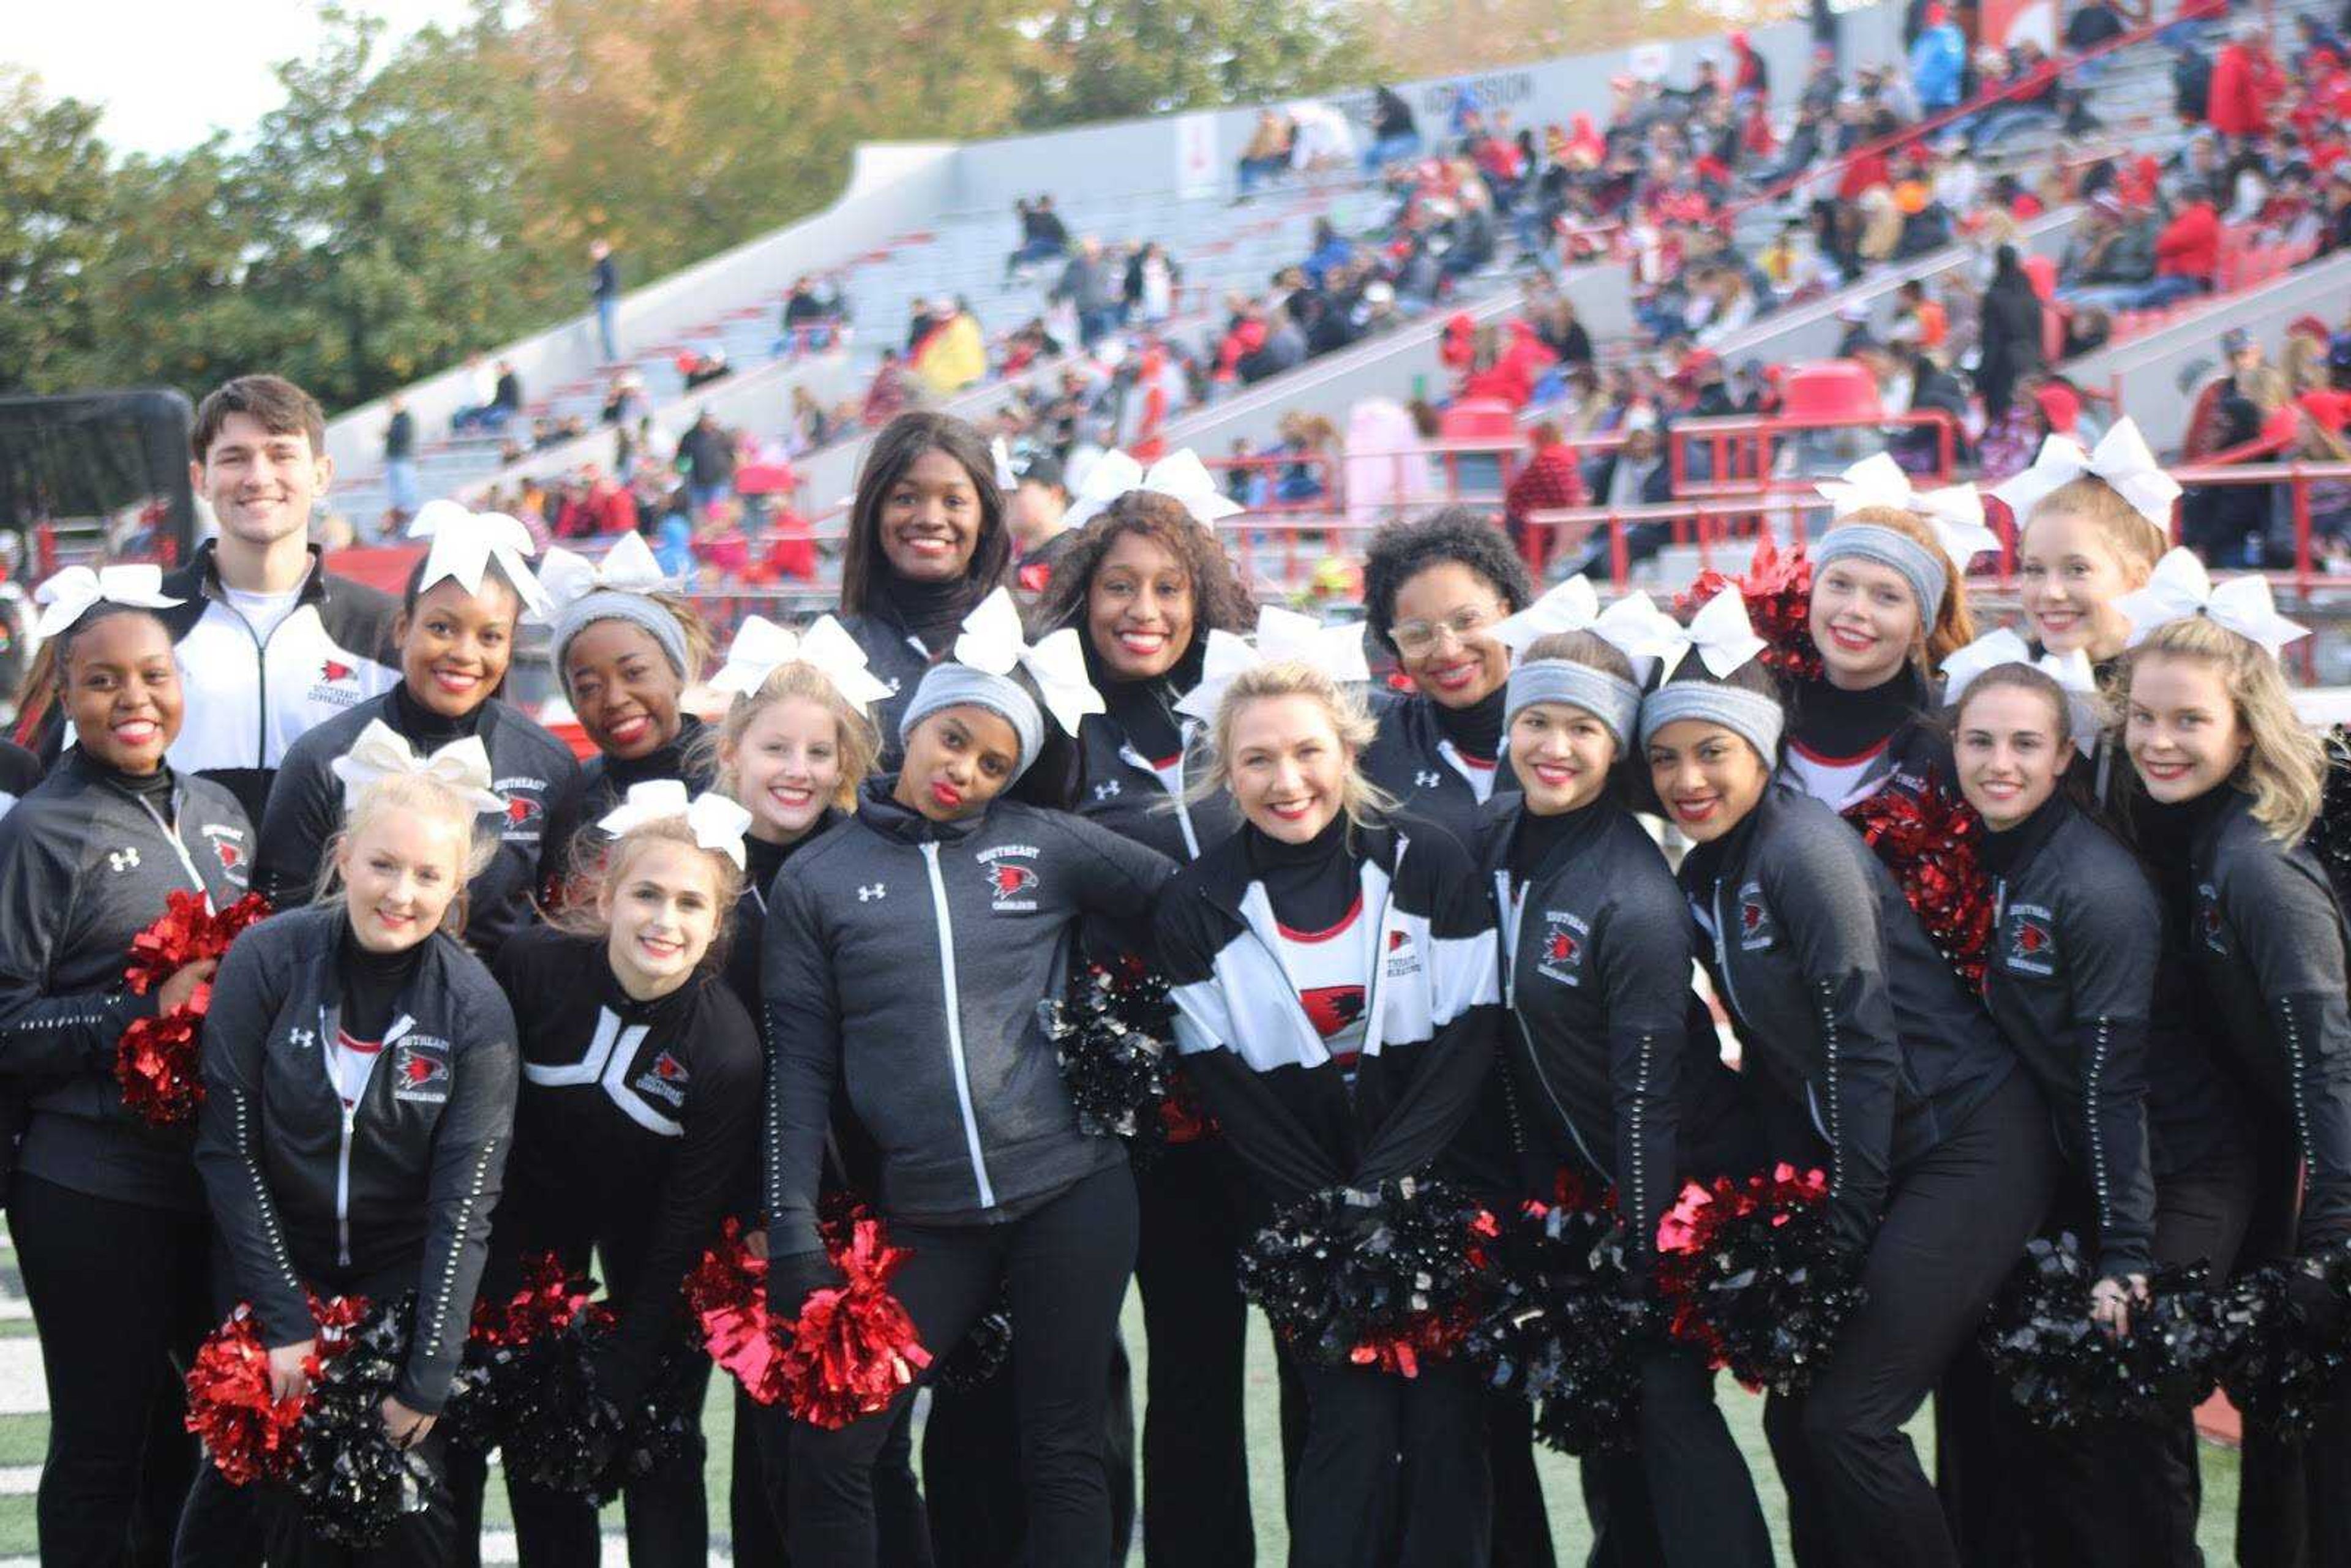 The Southeast cheerleading team poses during a football game on Nov. 8 at Houck Stadium.